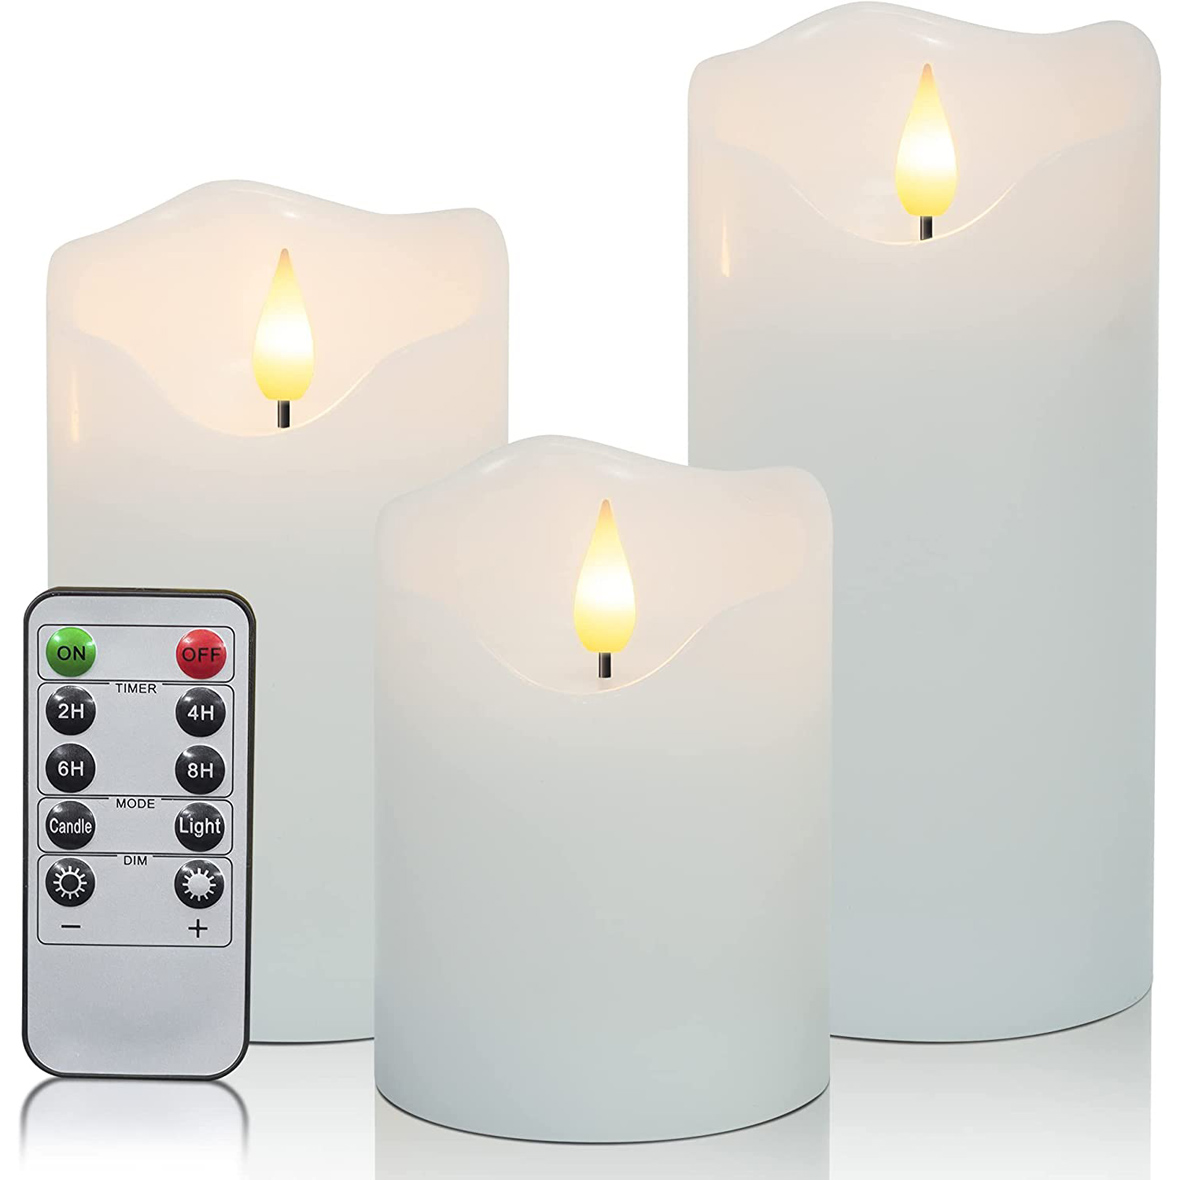 Yongmao Flameless Candles White Battery Operated Pillar Real Wax LED Electric Candles Warm Light 3D Wick Flickering with 10-Key Remote for Home Wedding Birthday Decoration D 3" H 4" 5" 6"(Set of 3)